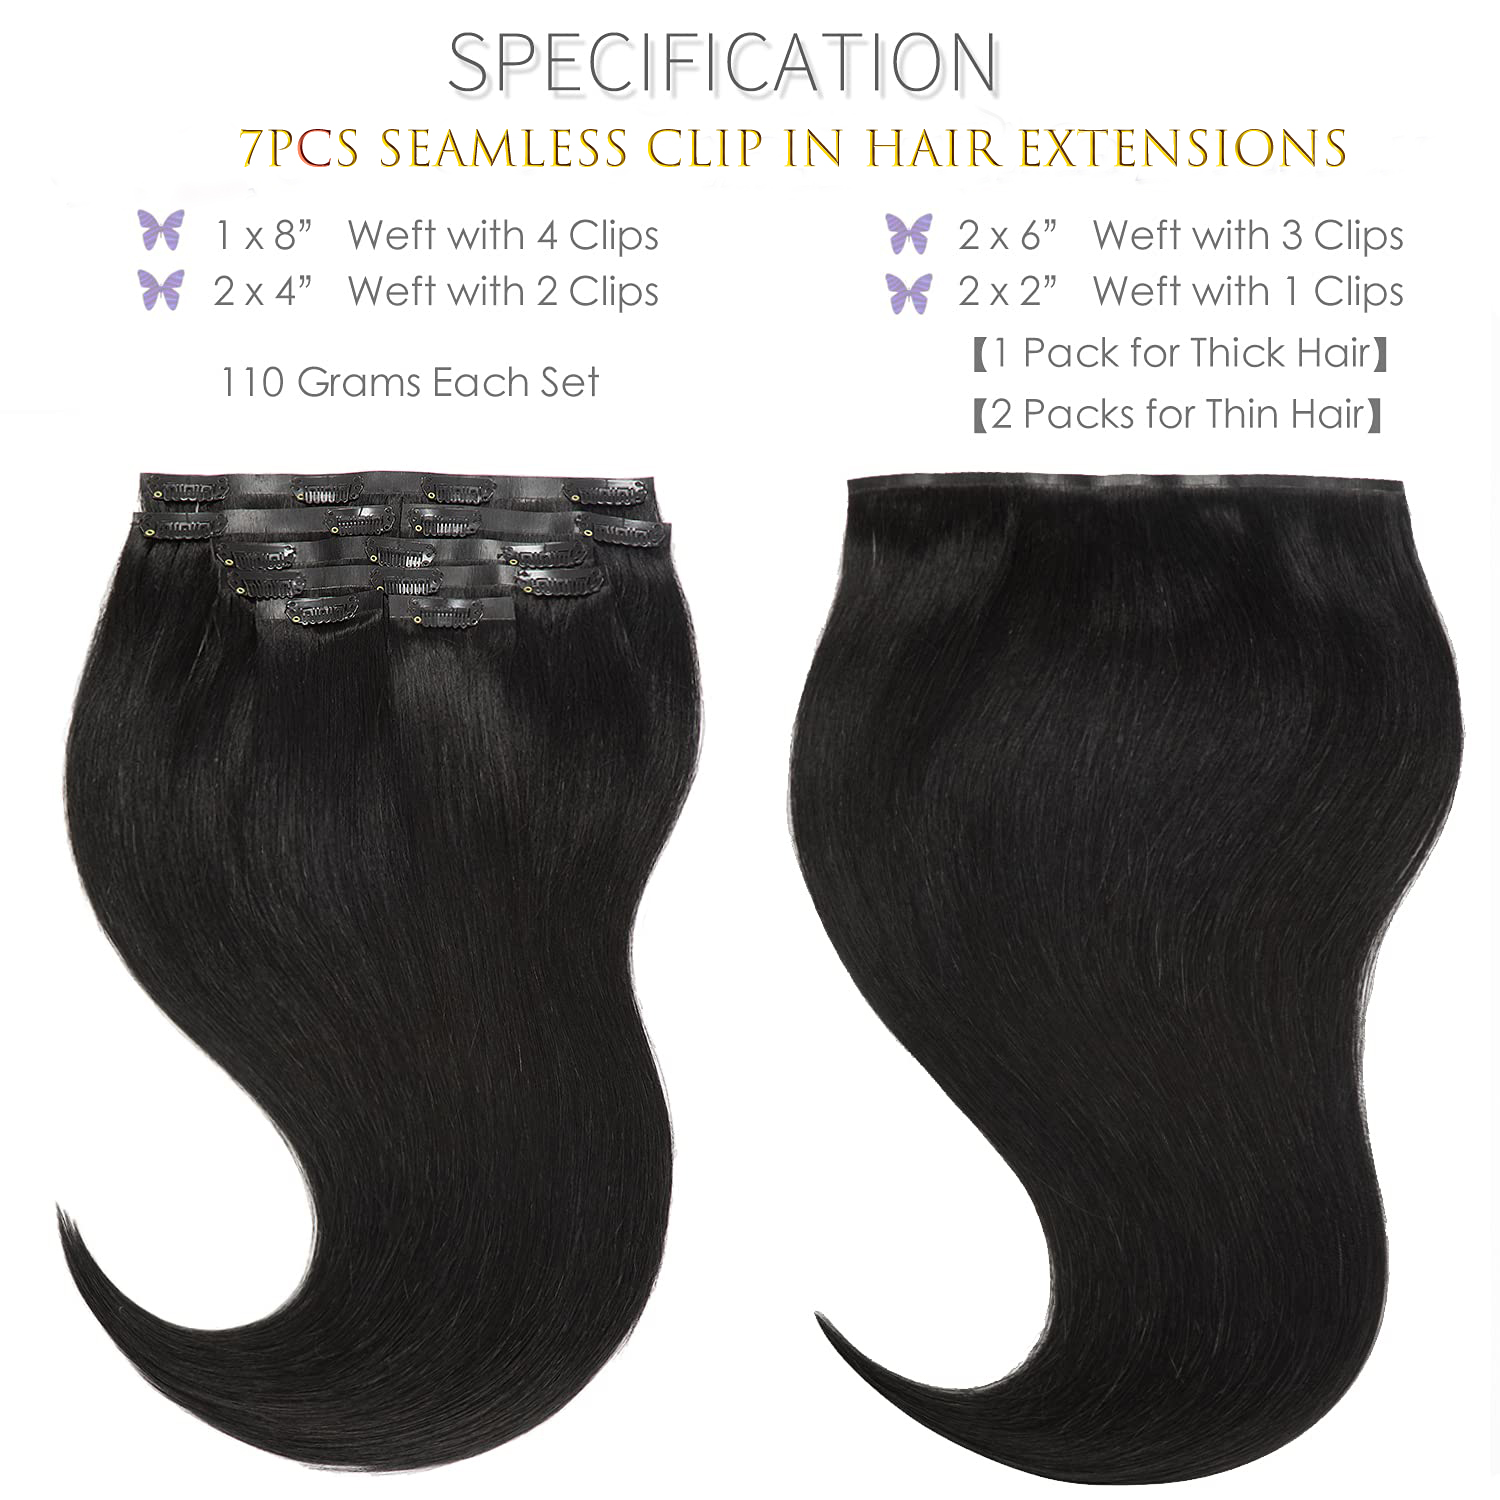 New Seamless Clip in Hair Extensions Real Human Hair Double PU Skin Weft Invisible Hair Extensions